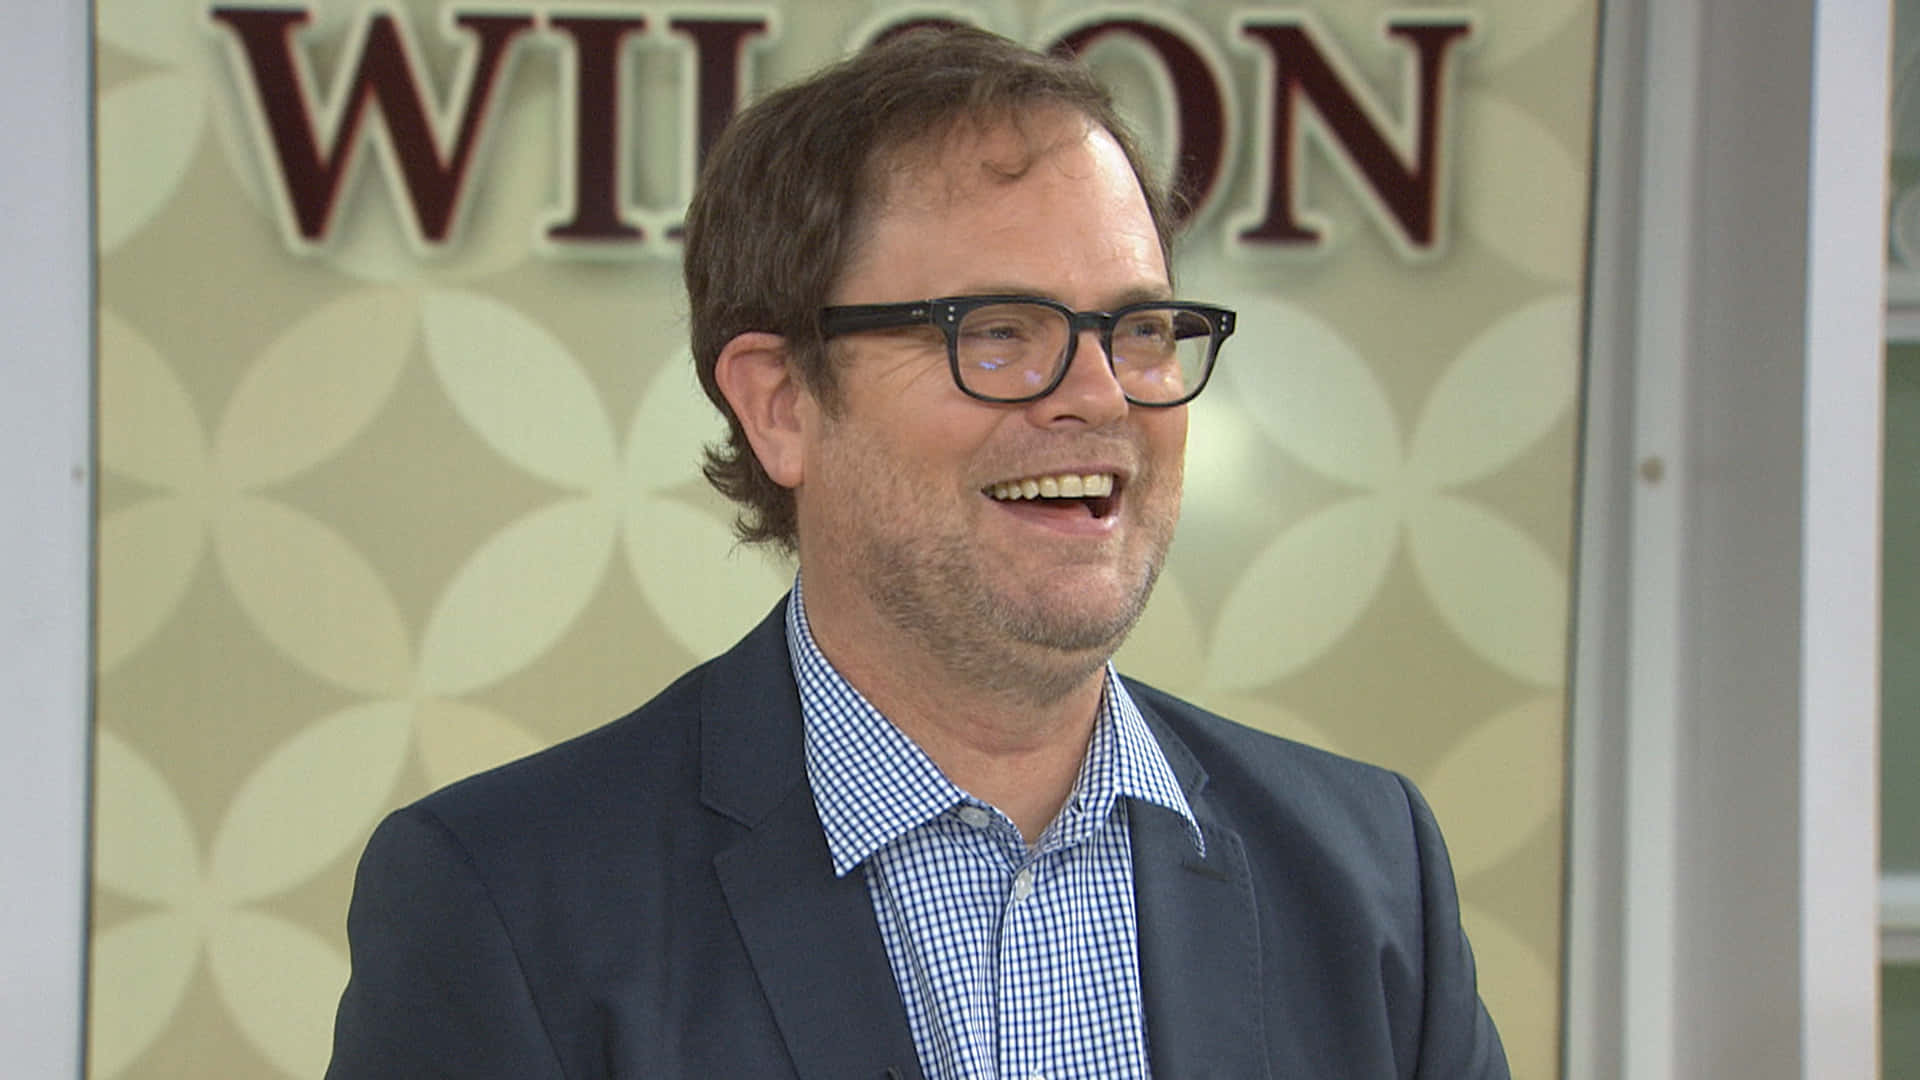 Rainn Wilson displays his unique energy // Description: Actor Rainn Wilson smiles and points a finger in a photo taken in 2016. His unique energy and charm made him a household name through his portrayal of the neurotic yet lovable Dwight Schrute on the popular show The Office. // Keywords: Rainn Wilson, actor, The Office, picture, portrait, energy, charisma, Dwight Schrute Wallpaper